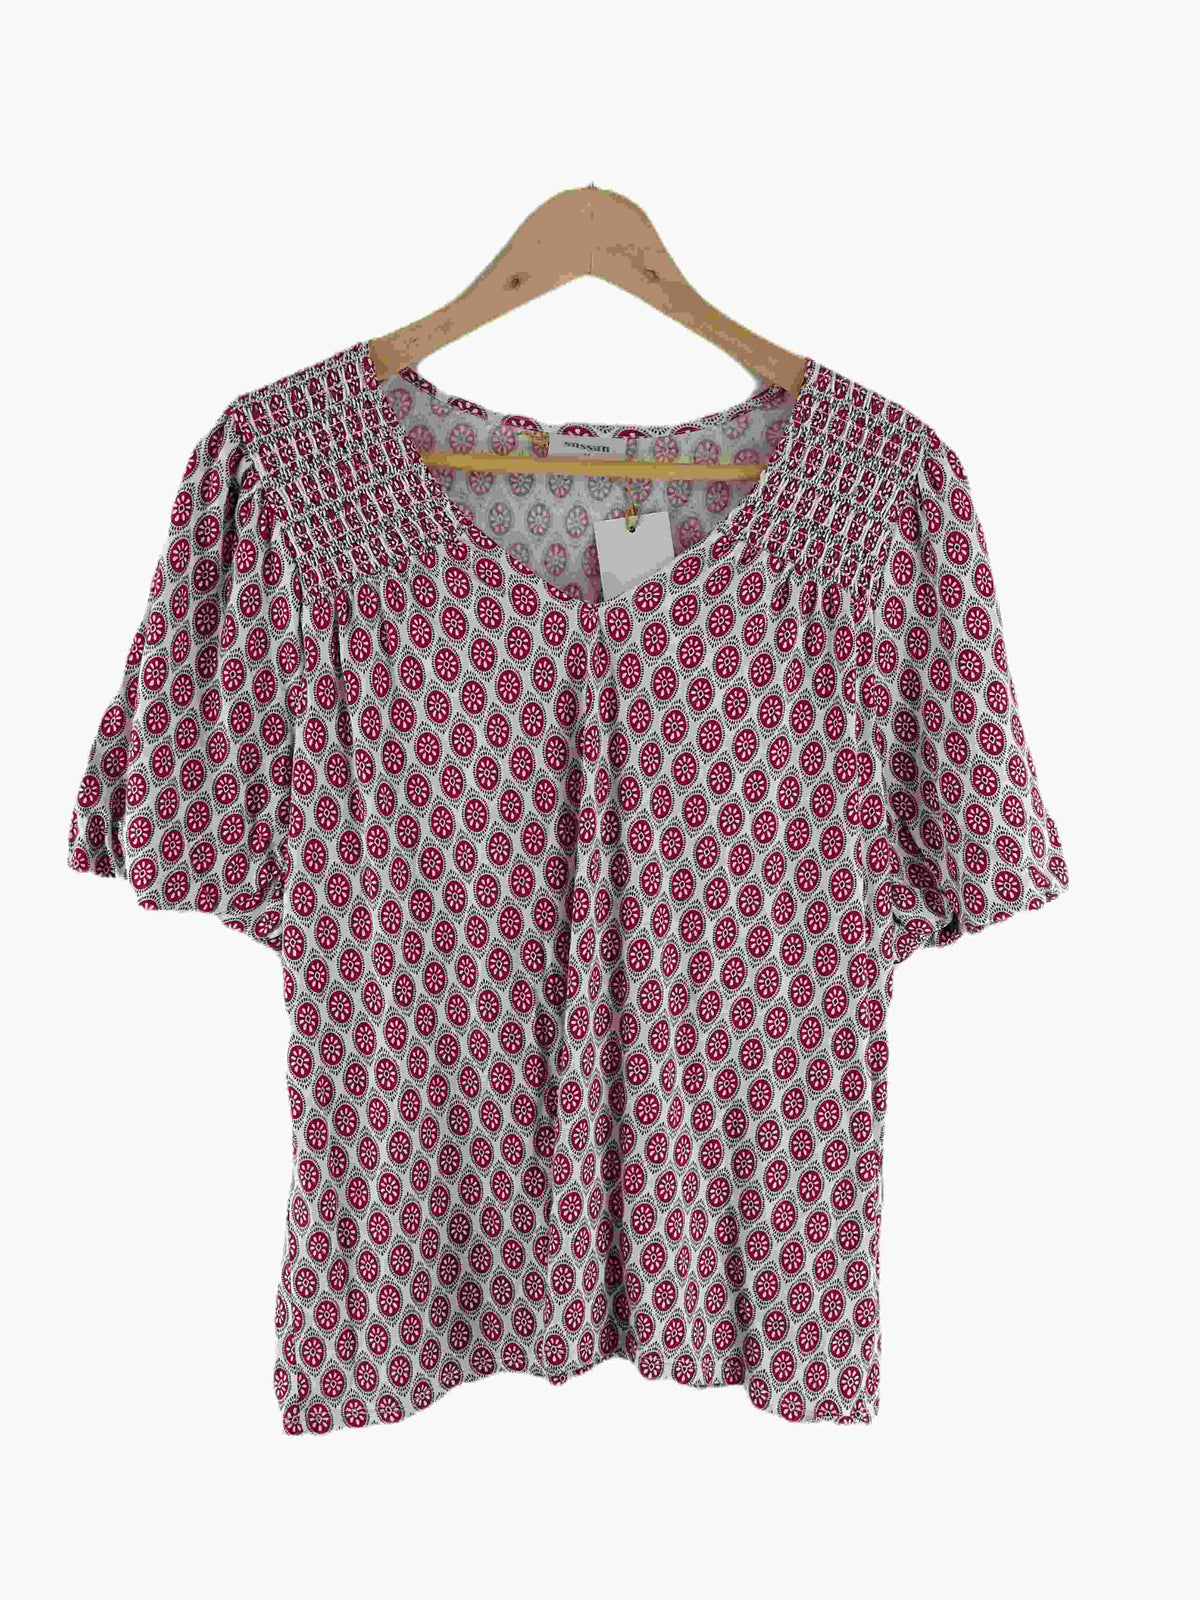 Sussan Red Patterned Top M